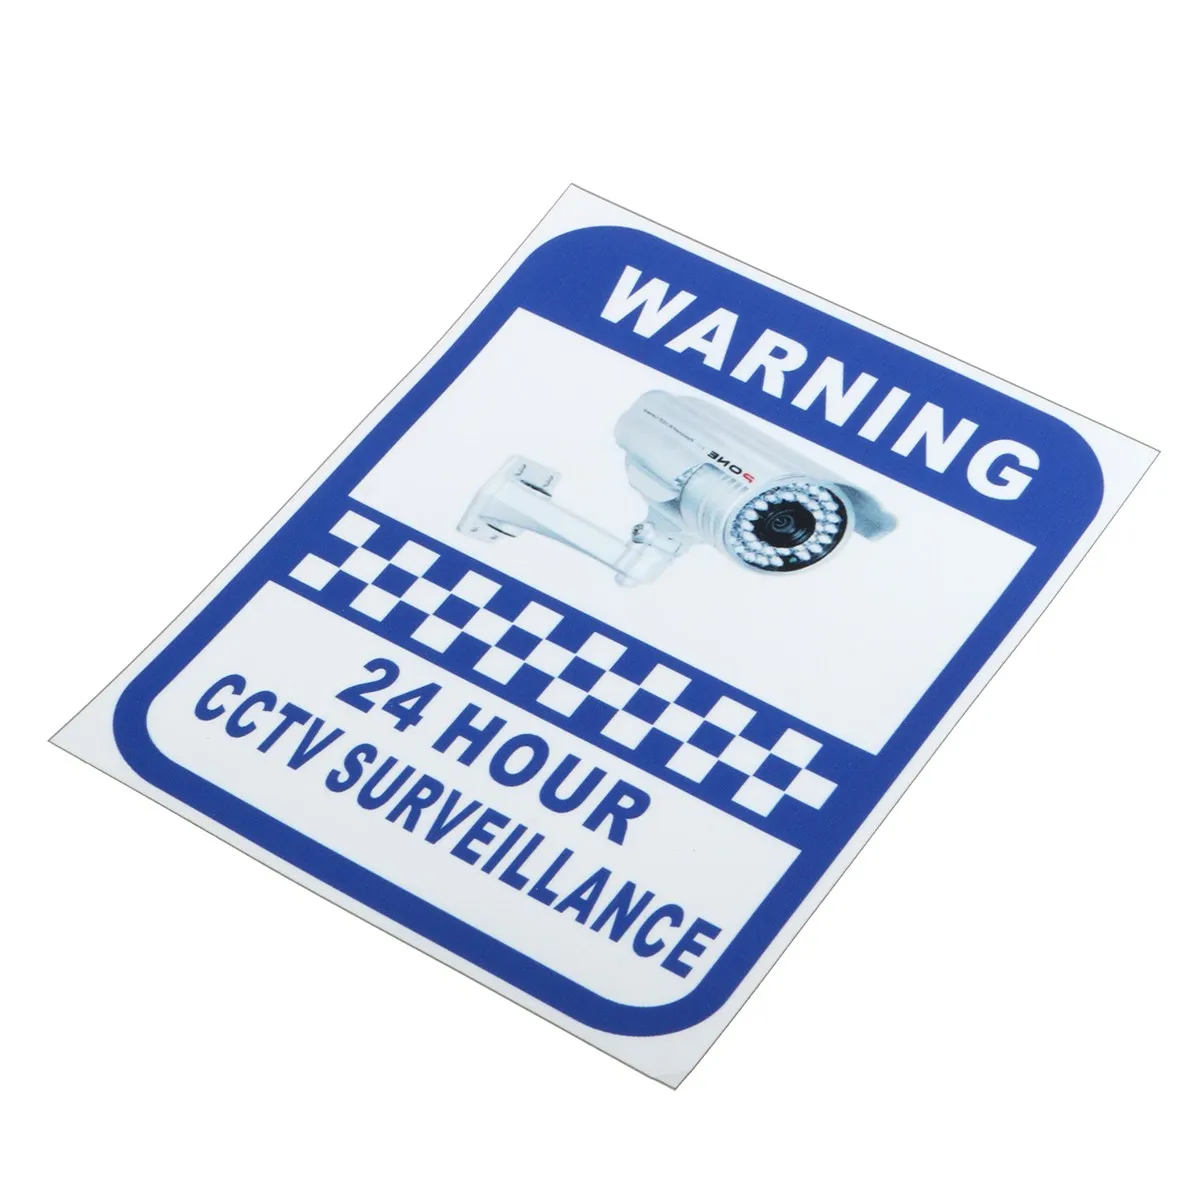 

Safurance 4xCCTV Camera Warning Stickers Surveillance Vinyl Decal Video Security Sign Home Safety